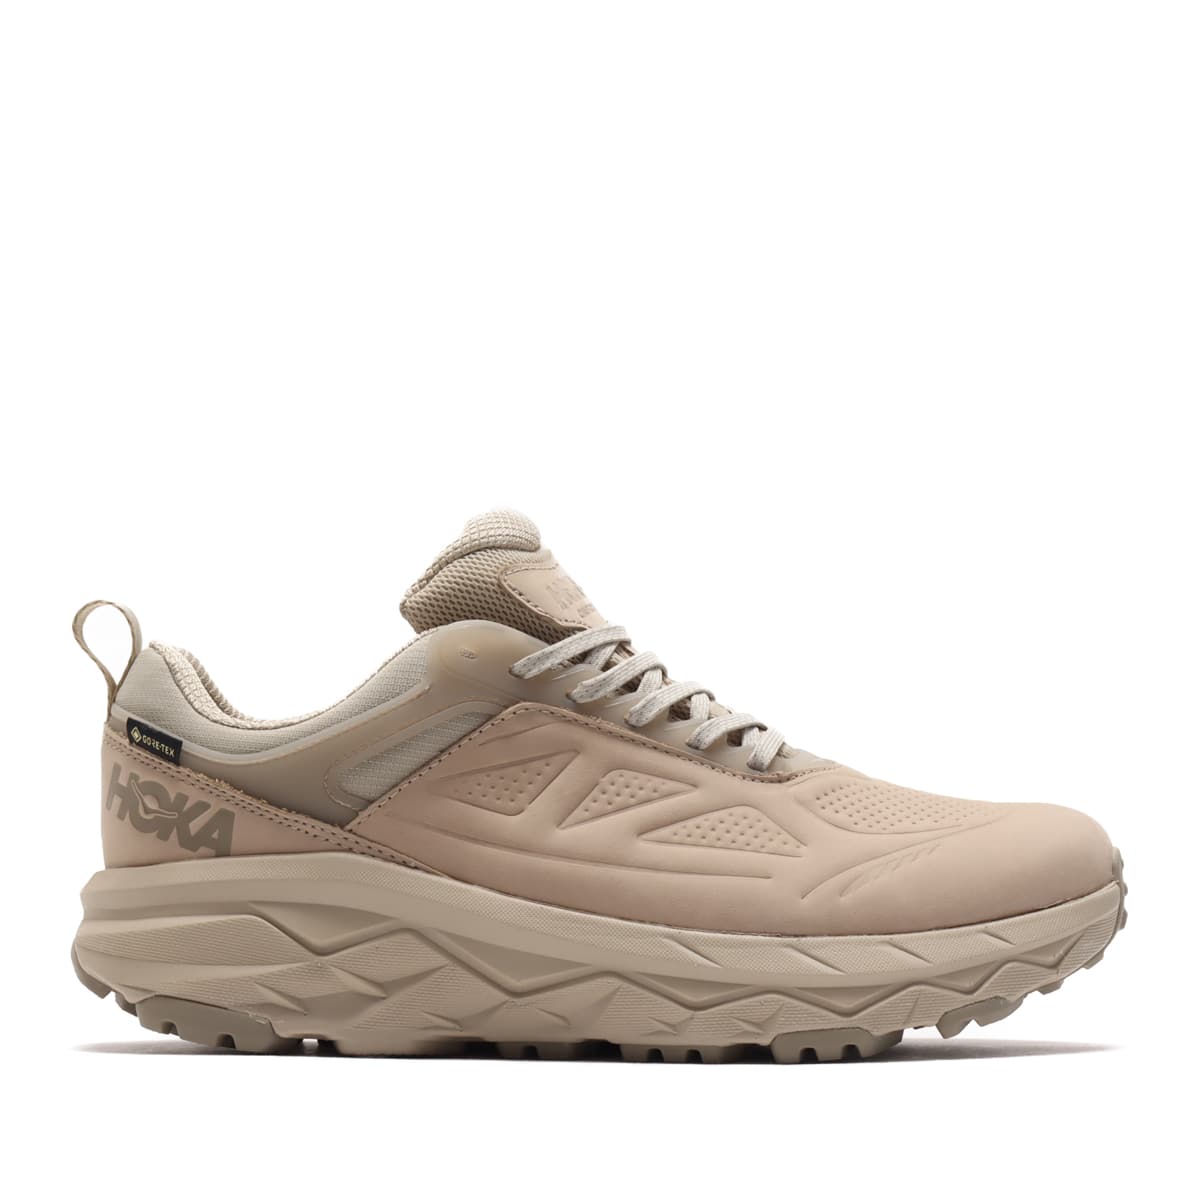 HOKA ONEONE CHALLENGER LOW GORE-TEX WIDE OXFORD TAN/DUNE 20FW-I